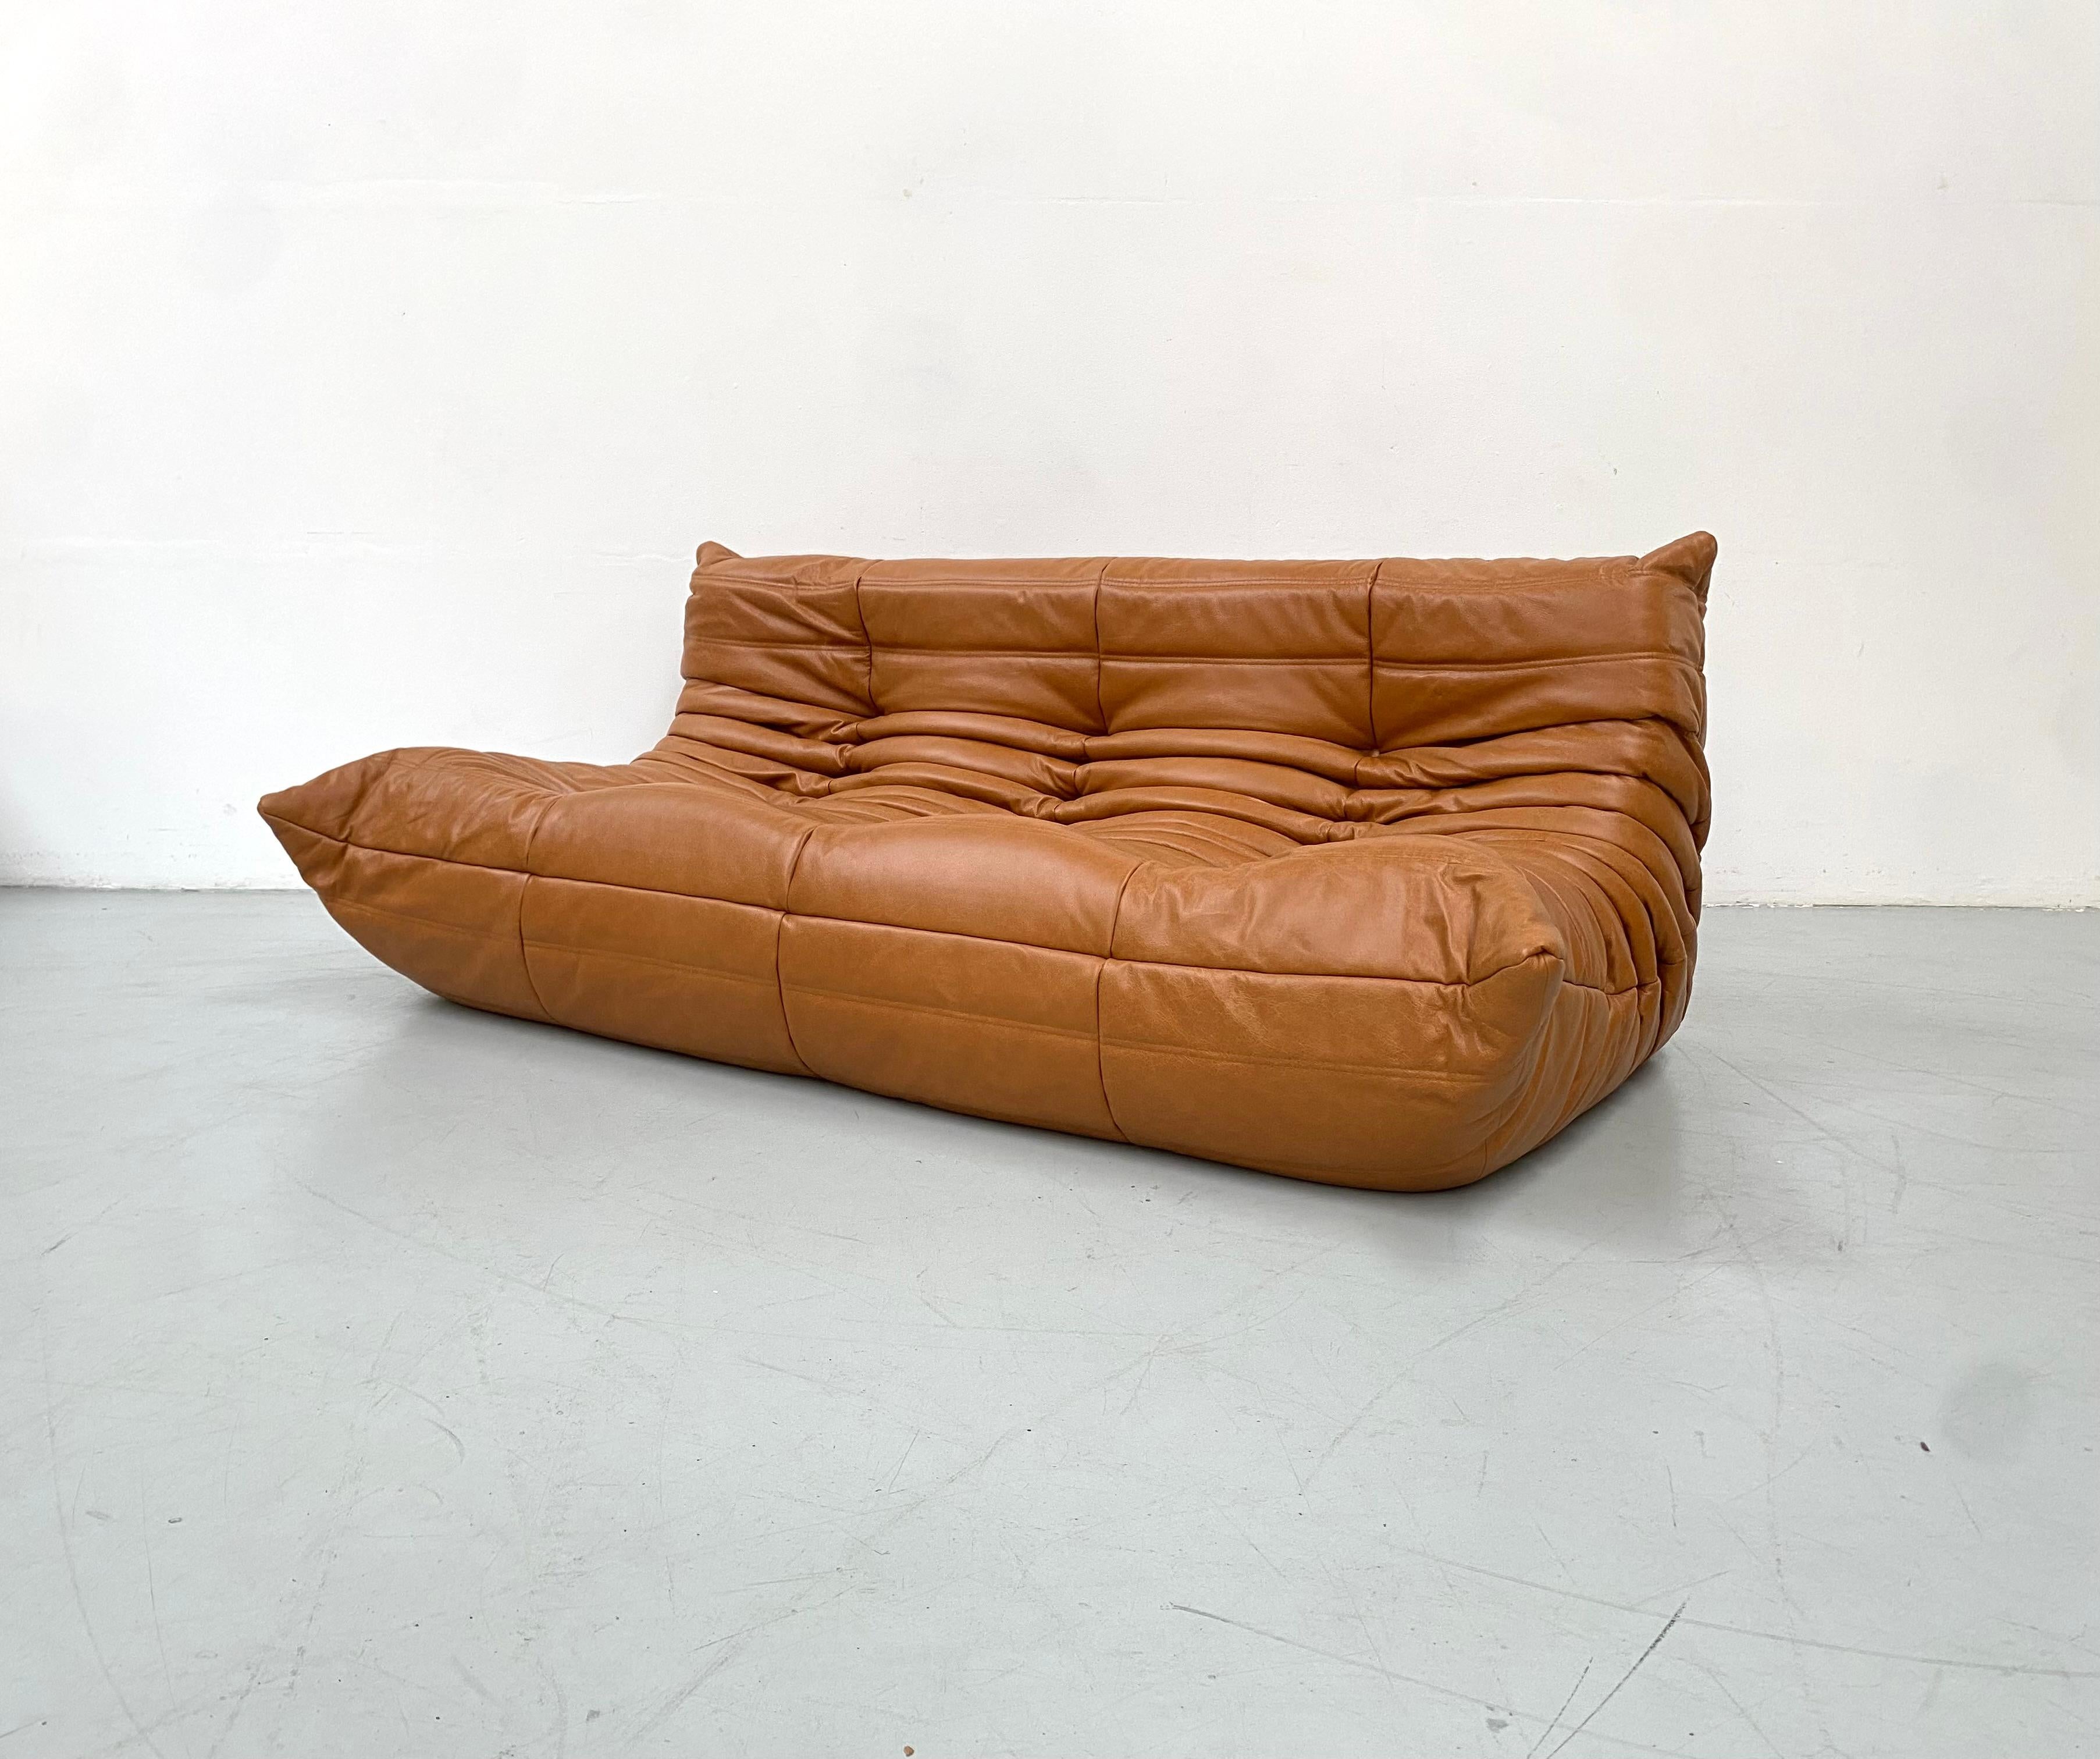 Mid-Century Modern French Vintage Togo Sofa in Brown Leather by Michel Ducaroy for Ligne Roset. For Sale